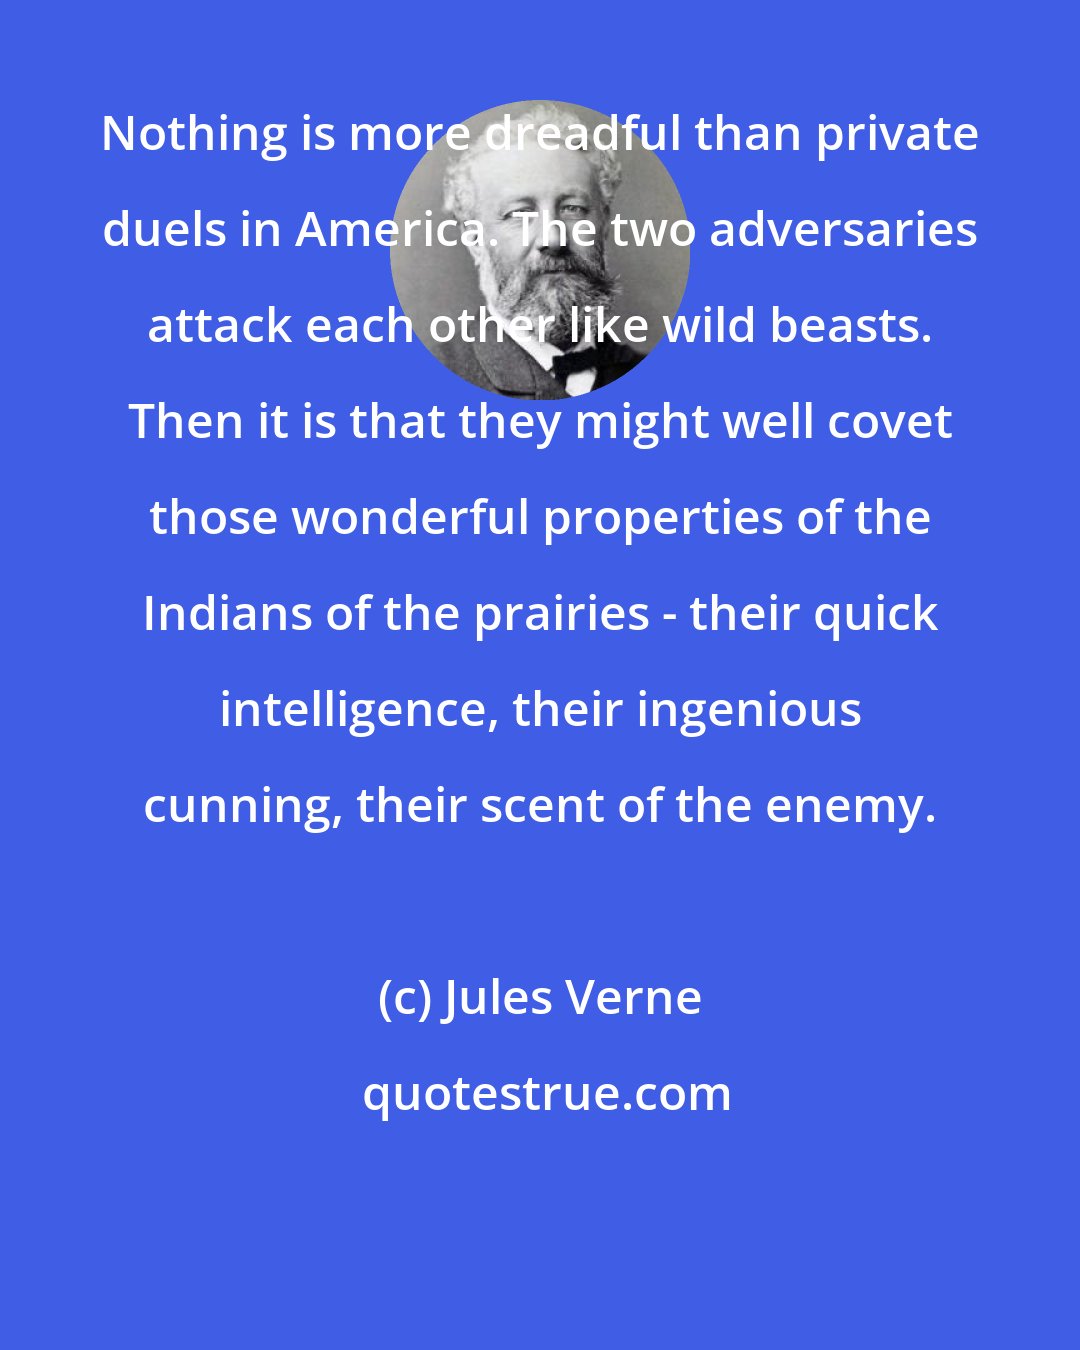 Jules Verne: Nothing is more dreadful than private duels in America. The two adversaries attack each other like wild beasts. Then it is that they might well covet those wonderful properties of the Indians of the prairies - their quick intelligence, their ingenious cunning, their scent of the enemy.